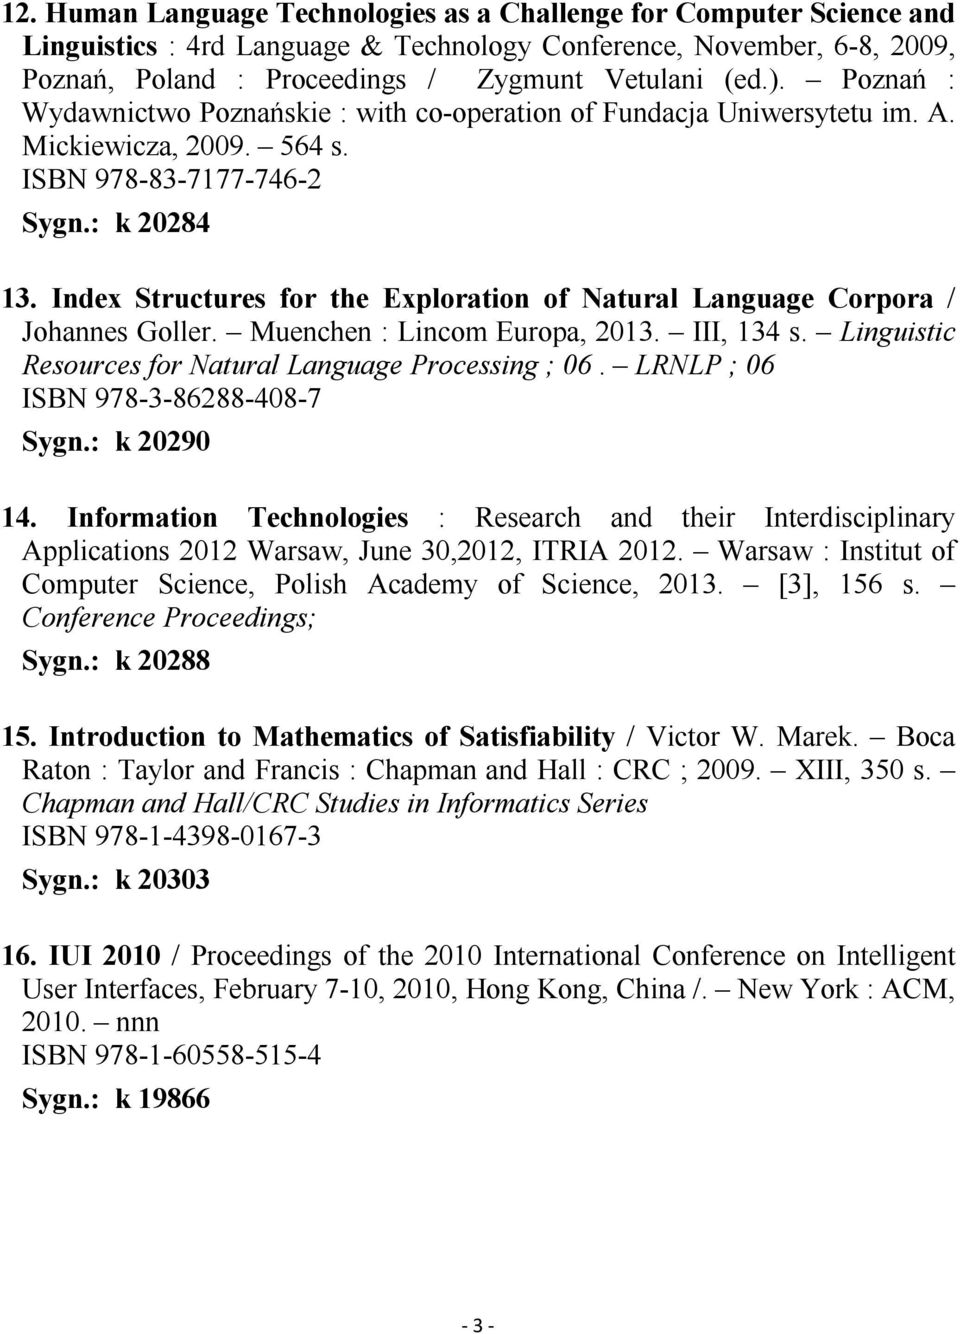 Index Structures for the Exploration of Natural Language Corpora / Johannes Goller. Muenchen : Lincom Europa, 2013. III, 134 s. Linguistic Resources for Natural Language Processing ; 06.